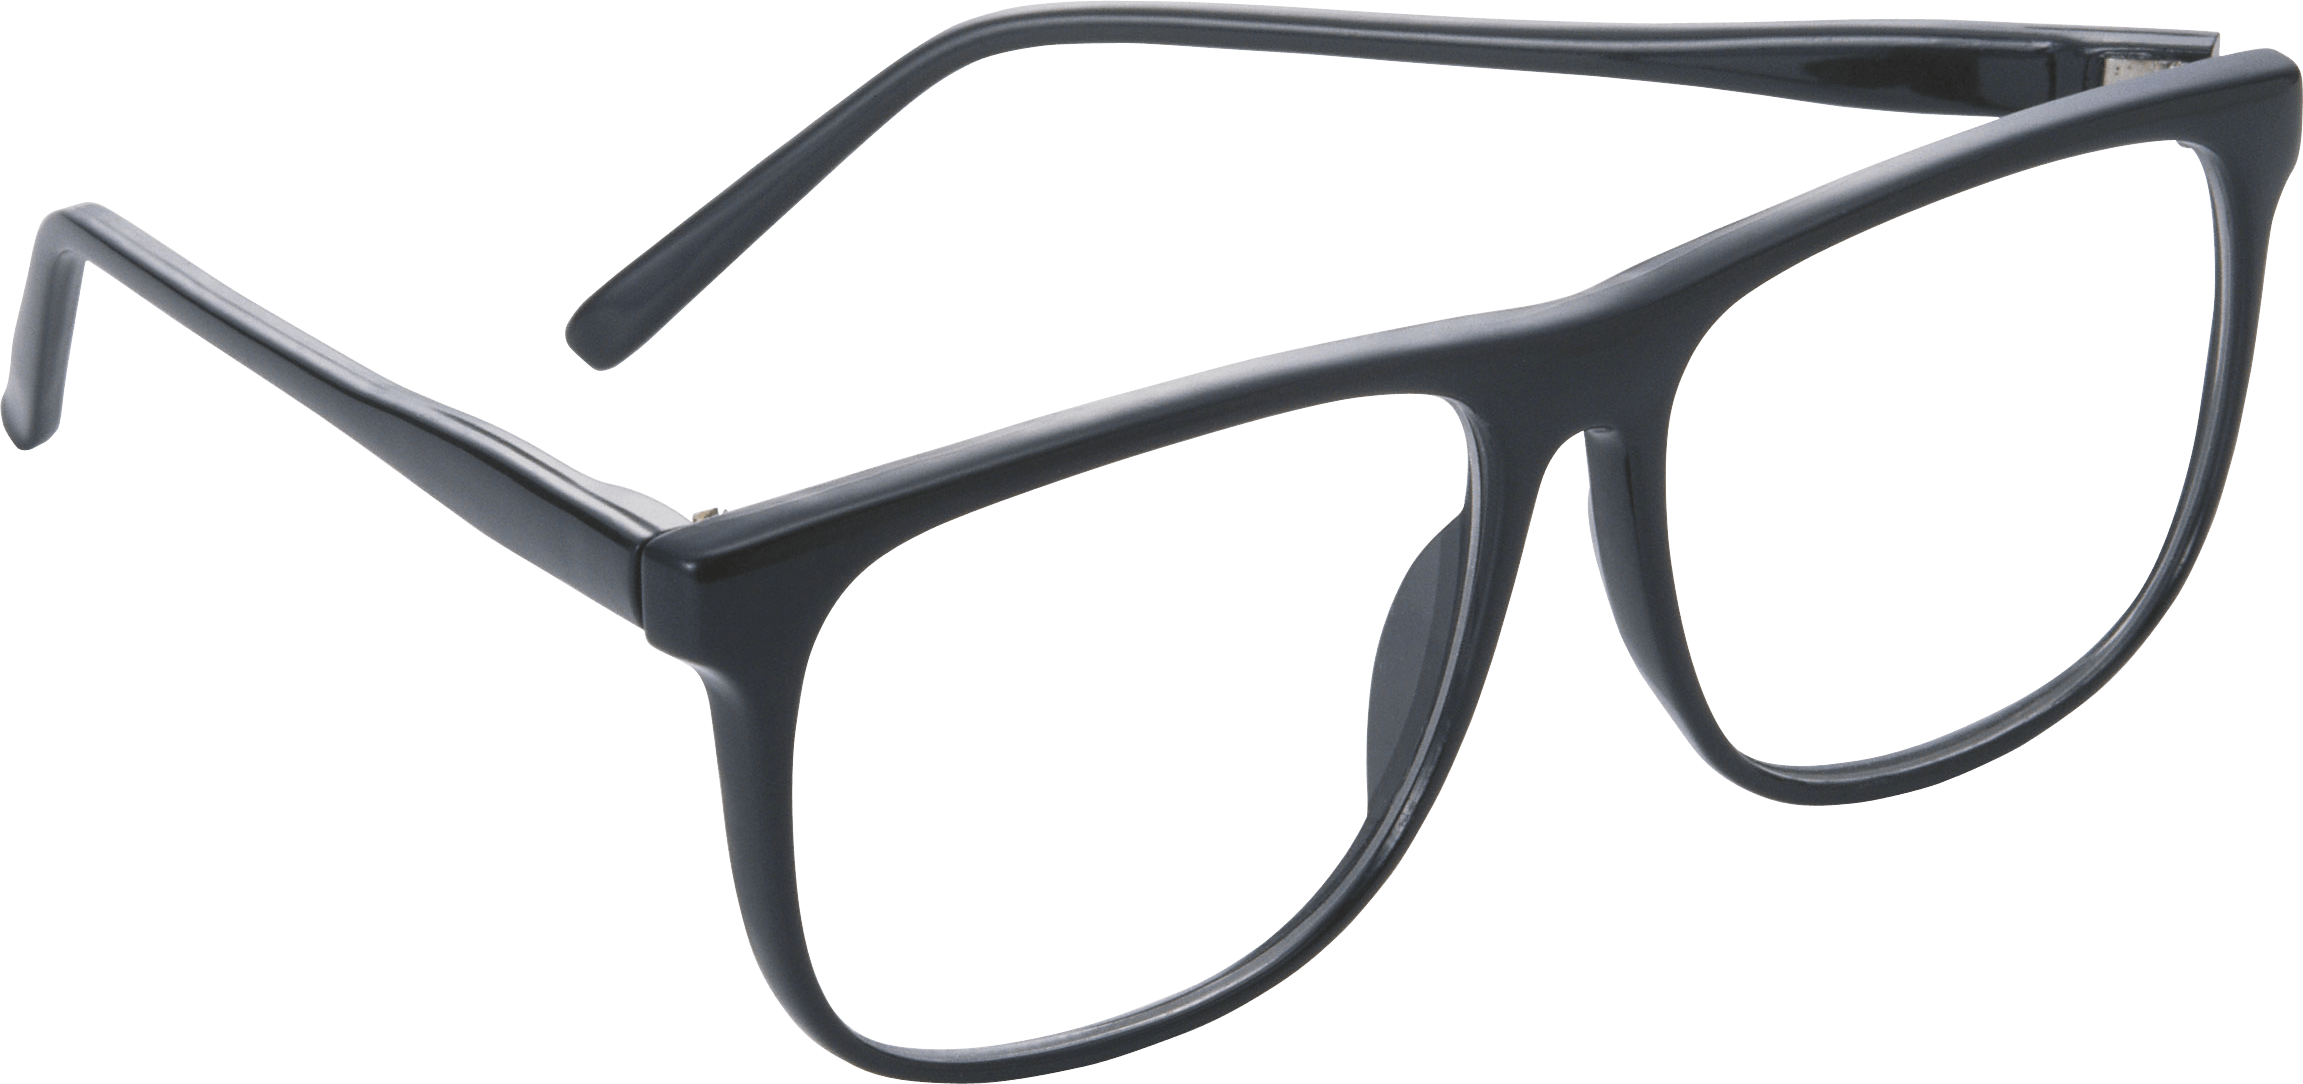 Spectacles Glasses PNG Free Photo Clipart